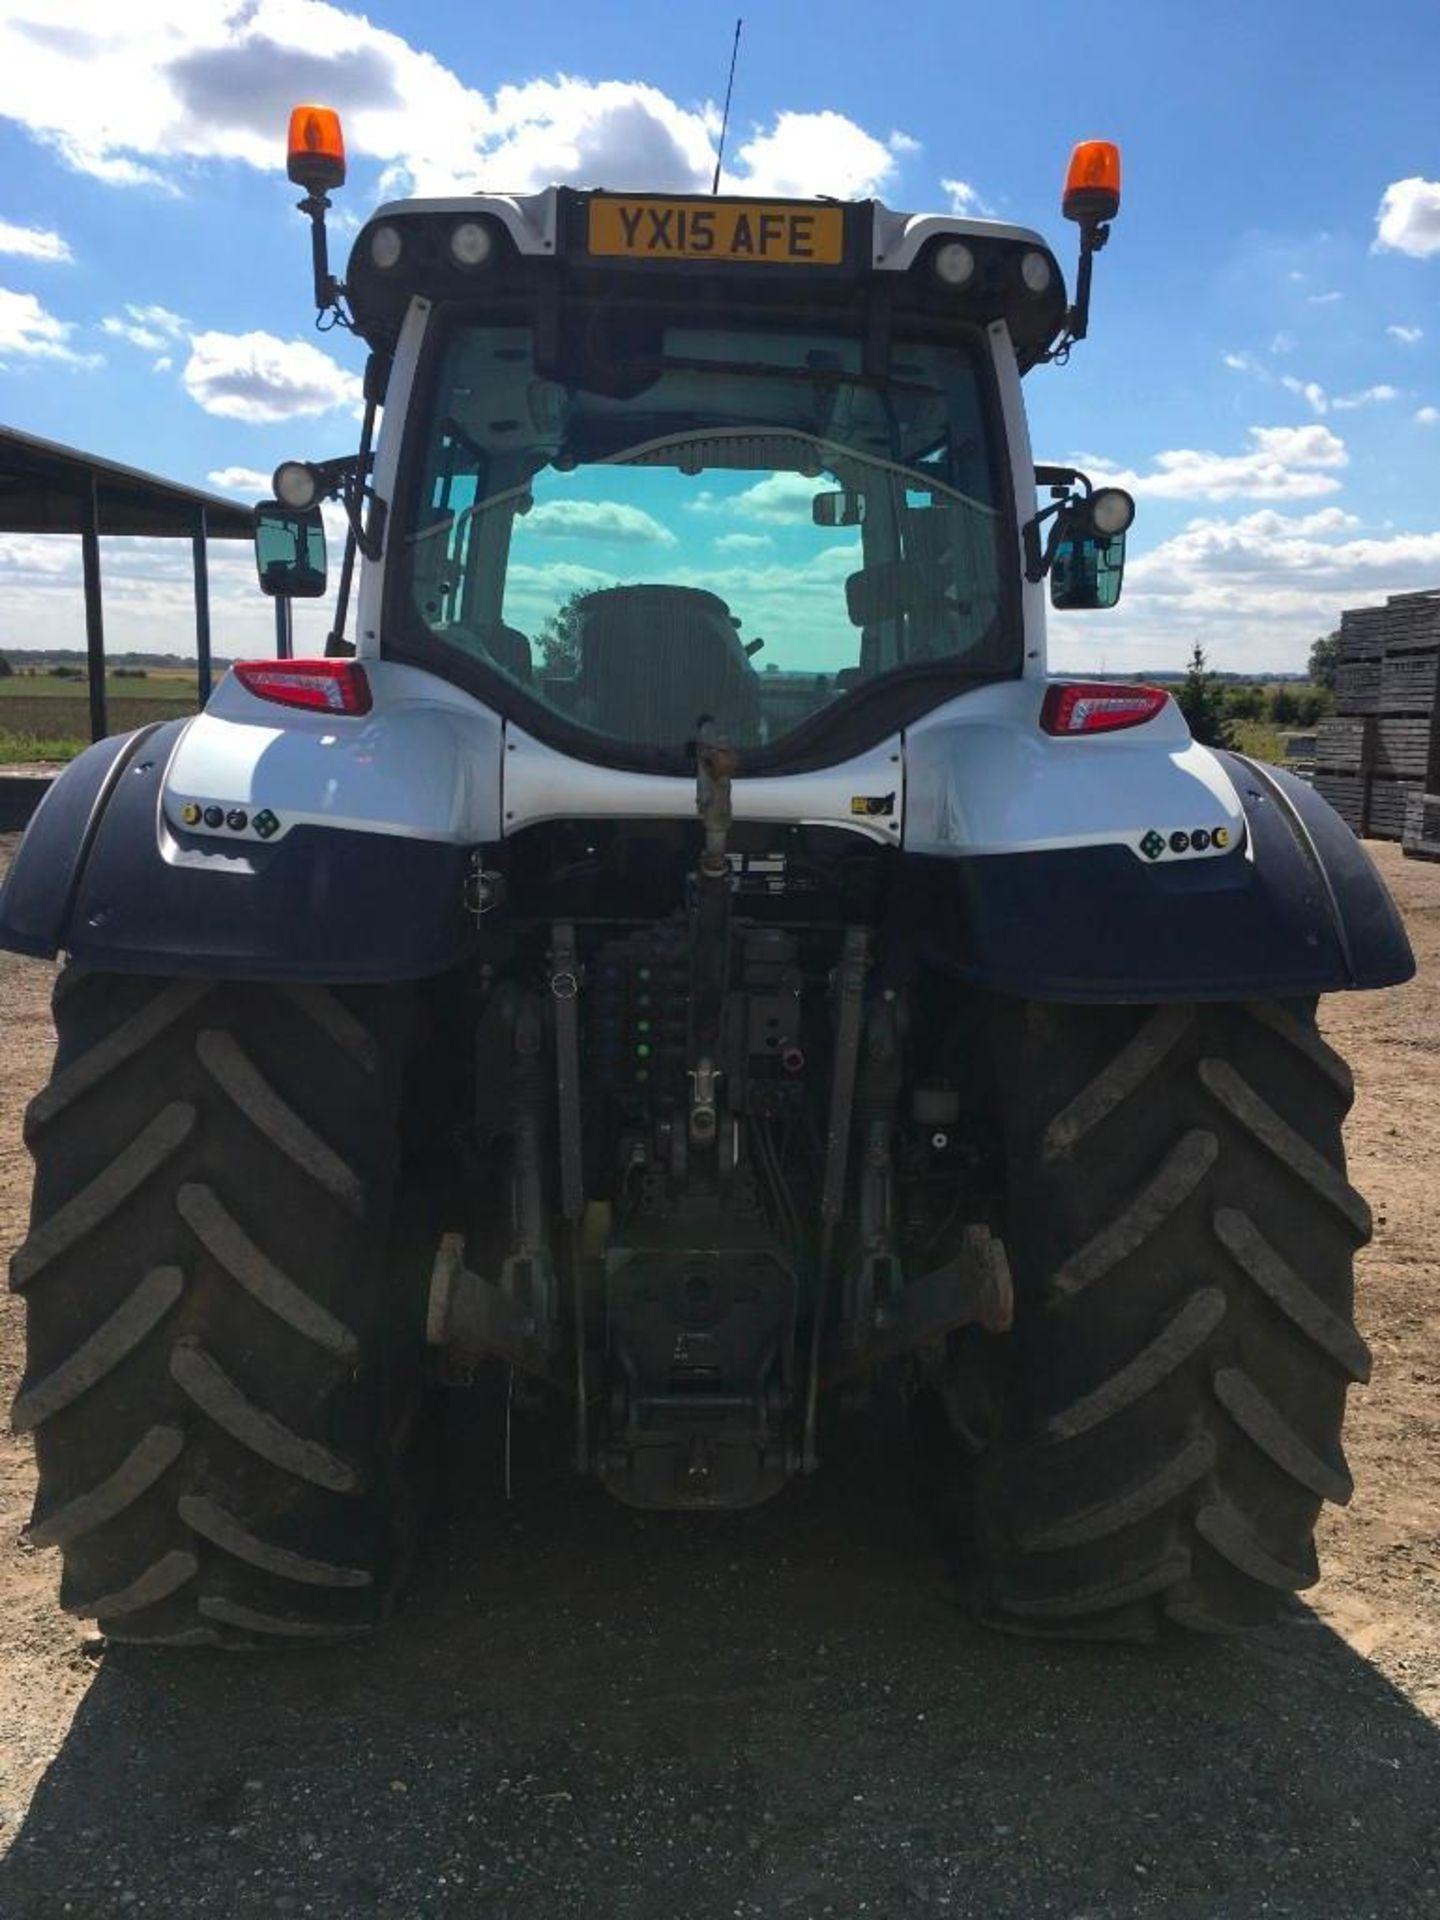 2015 Valtra T174 Versu 50kph tractor, powershift transmission, air suspension, 2 front and 4 rear sp - Image 10 of 15